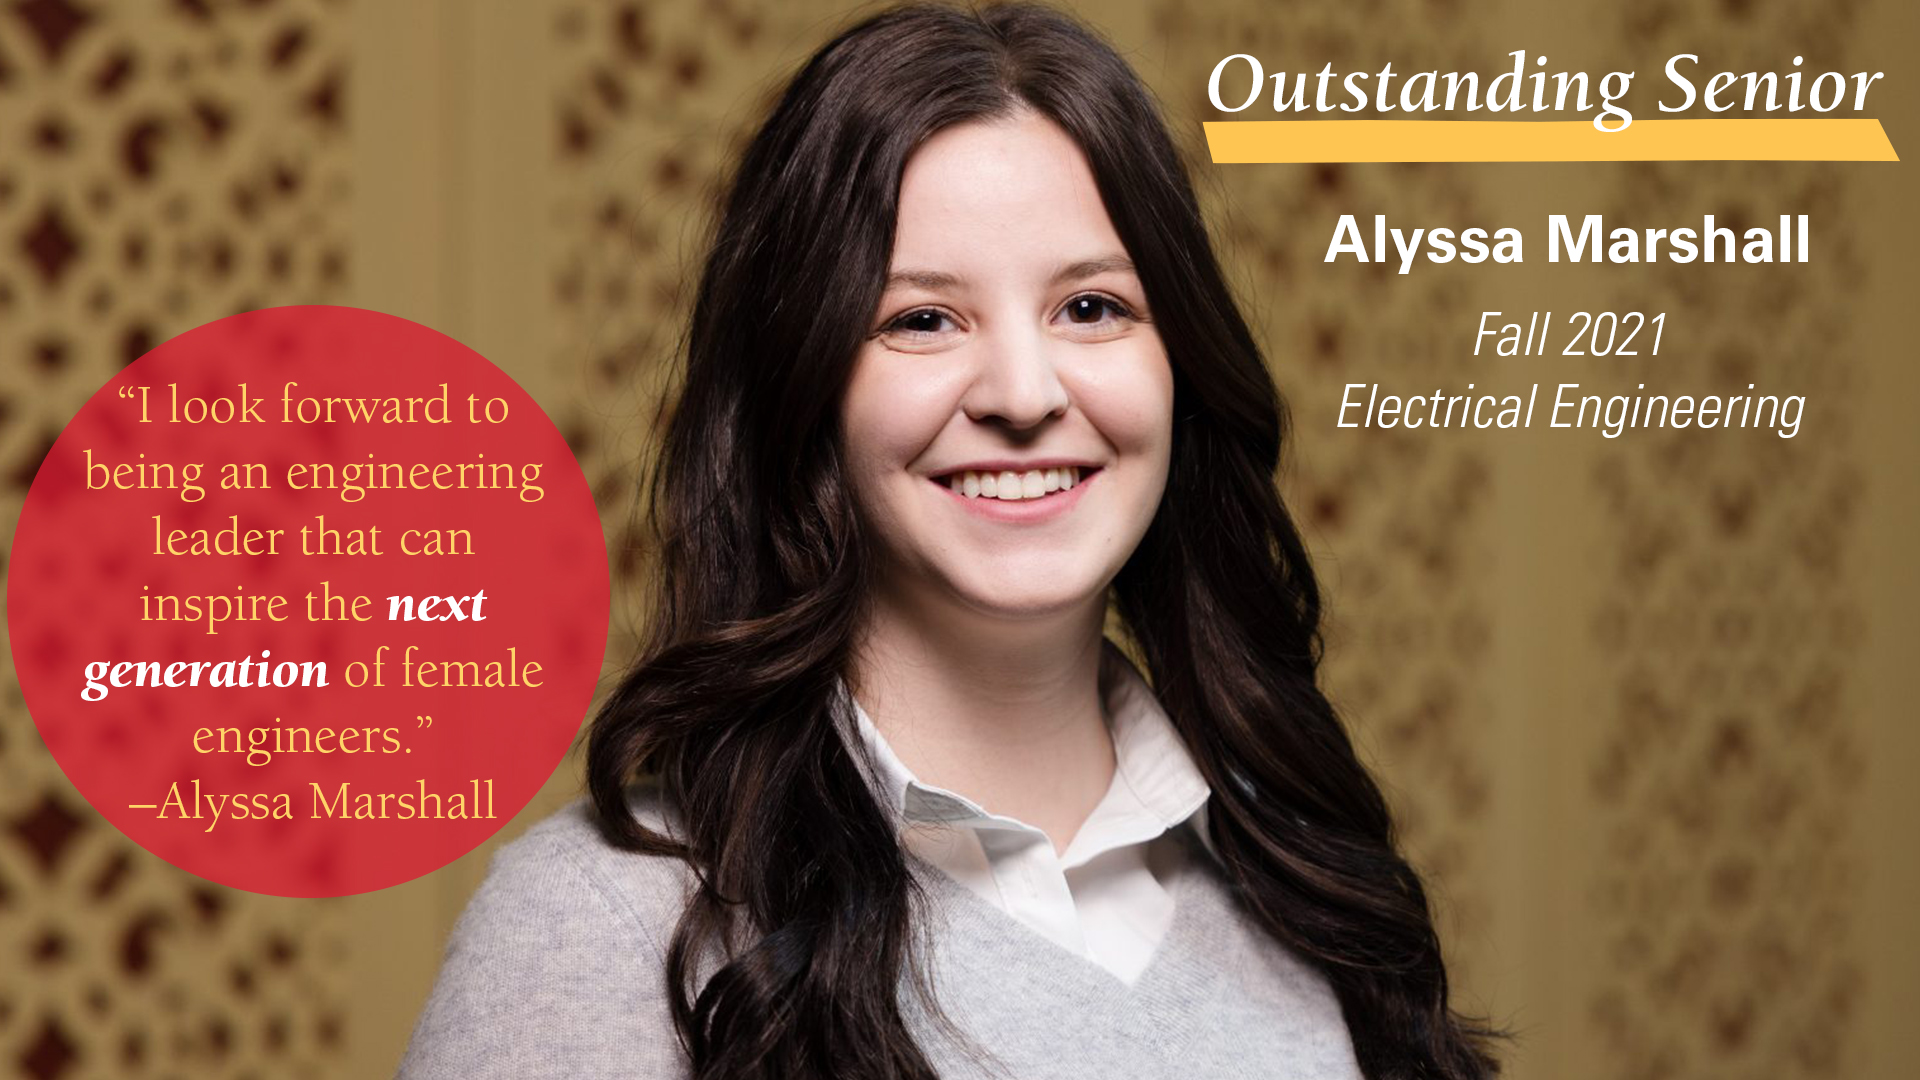 Photo of Alyssa Marshall, Fall 2021 Outstanding Senior in Electrical Engineering